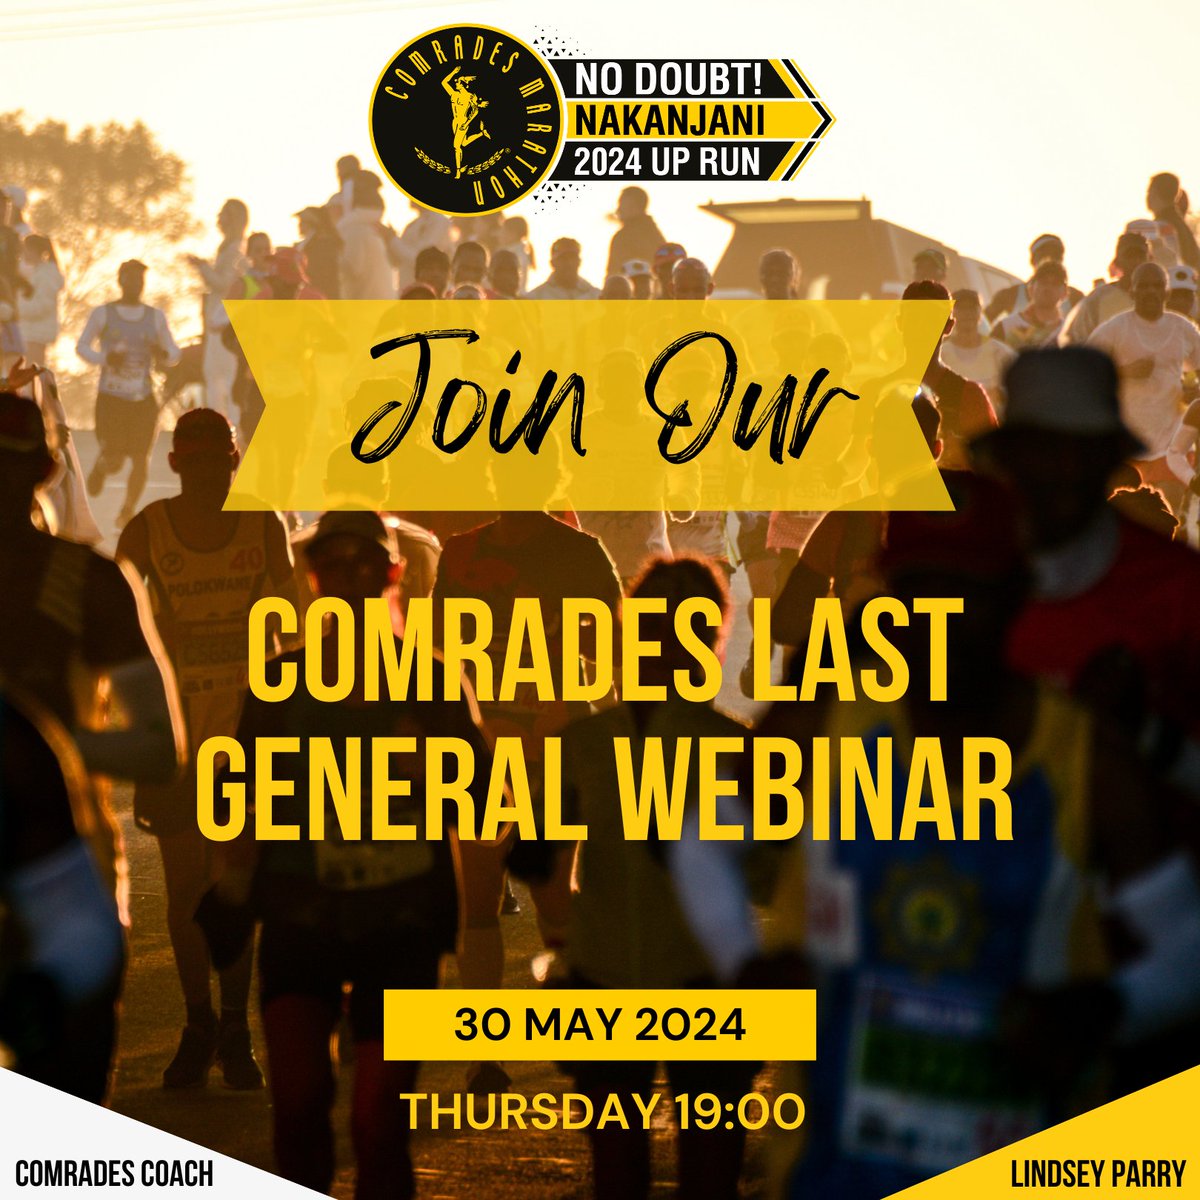 Don't forget to join us tonight for the last Comrades Webinar @ 19:00 where Comrades Coach Lindsey Parry will be providing insightful advice to get you ready for the #Comrades2024 Sign up for FREE here: coachparry.com/2024-comrades-…. #NoDoubt #Nakanjani